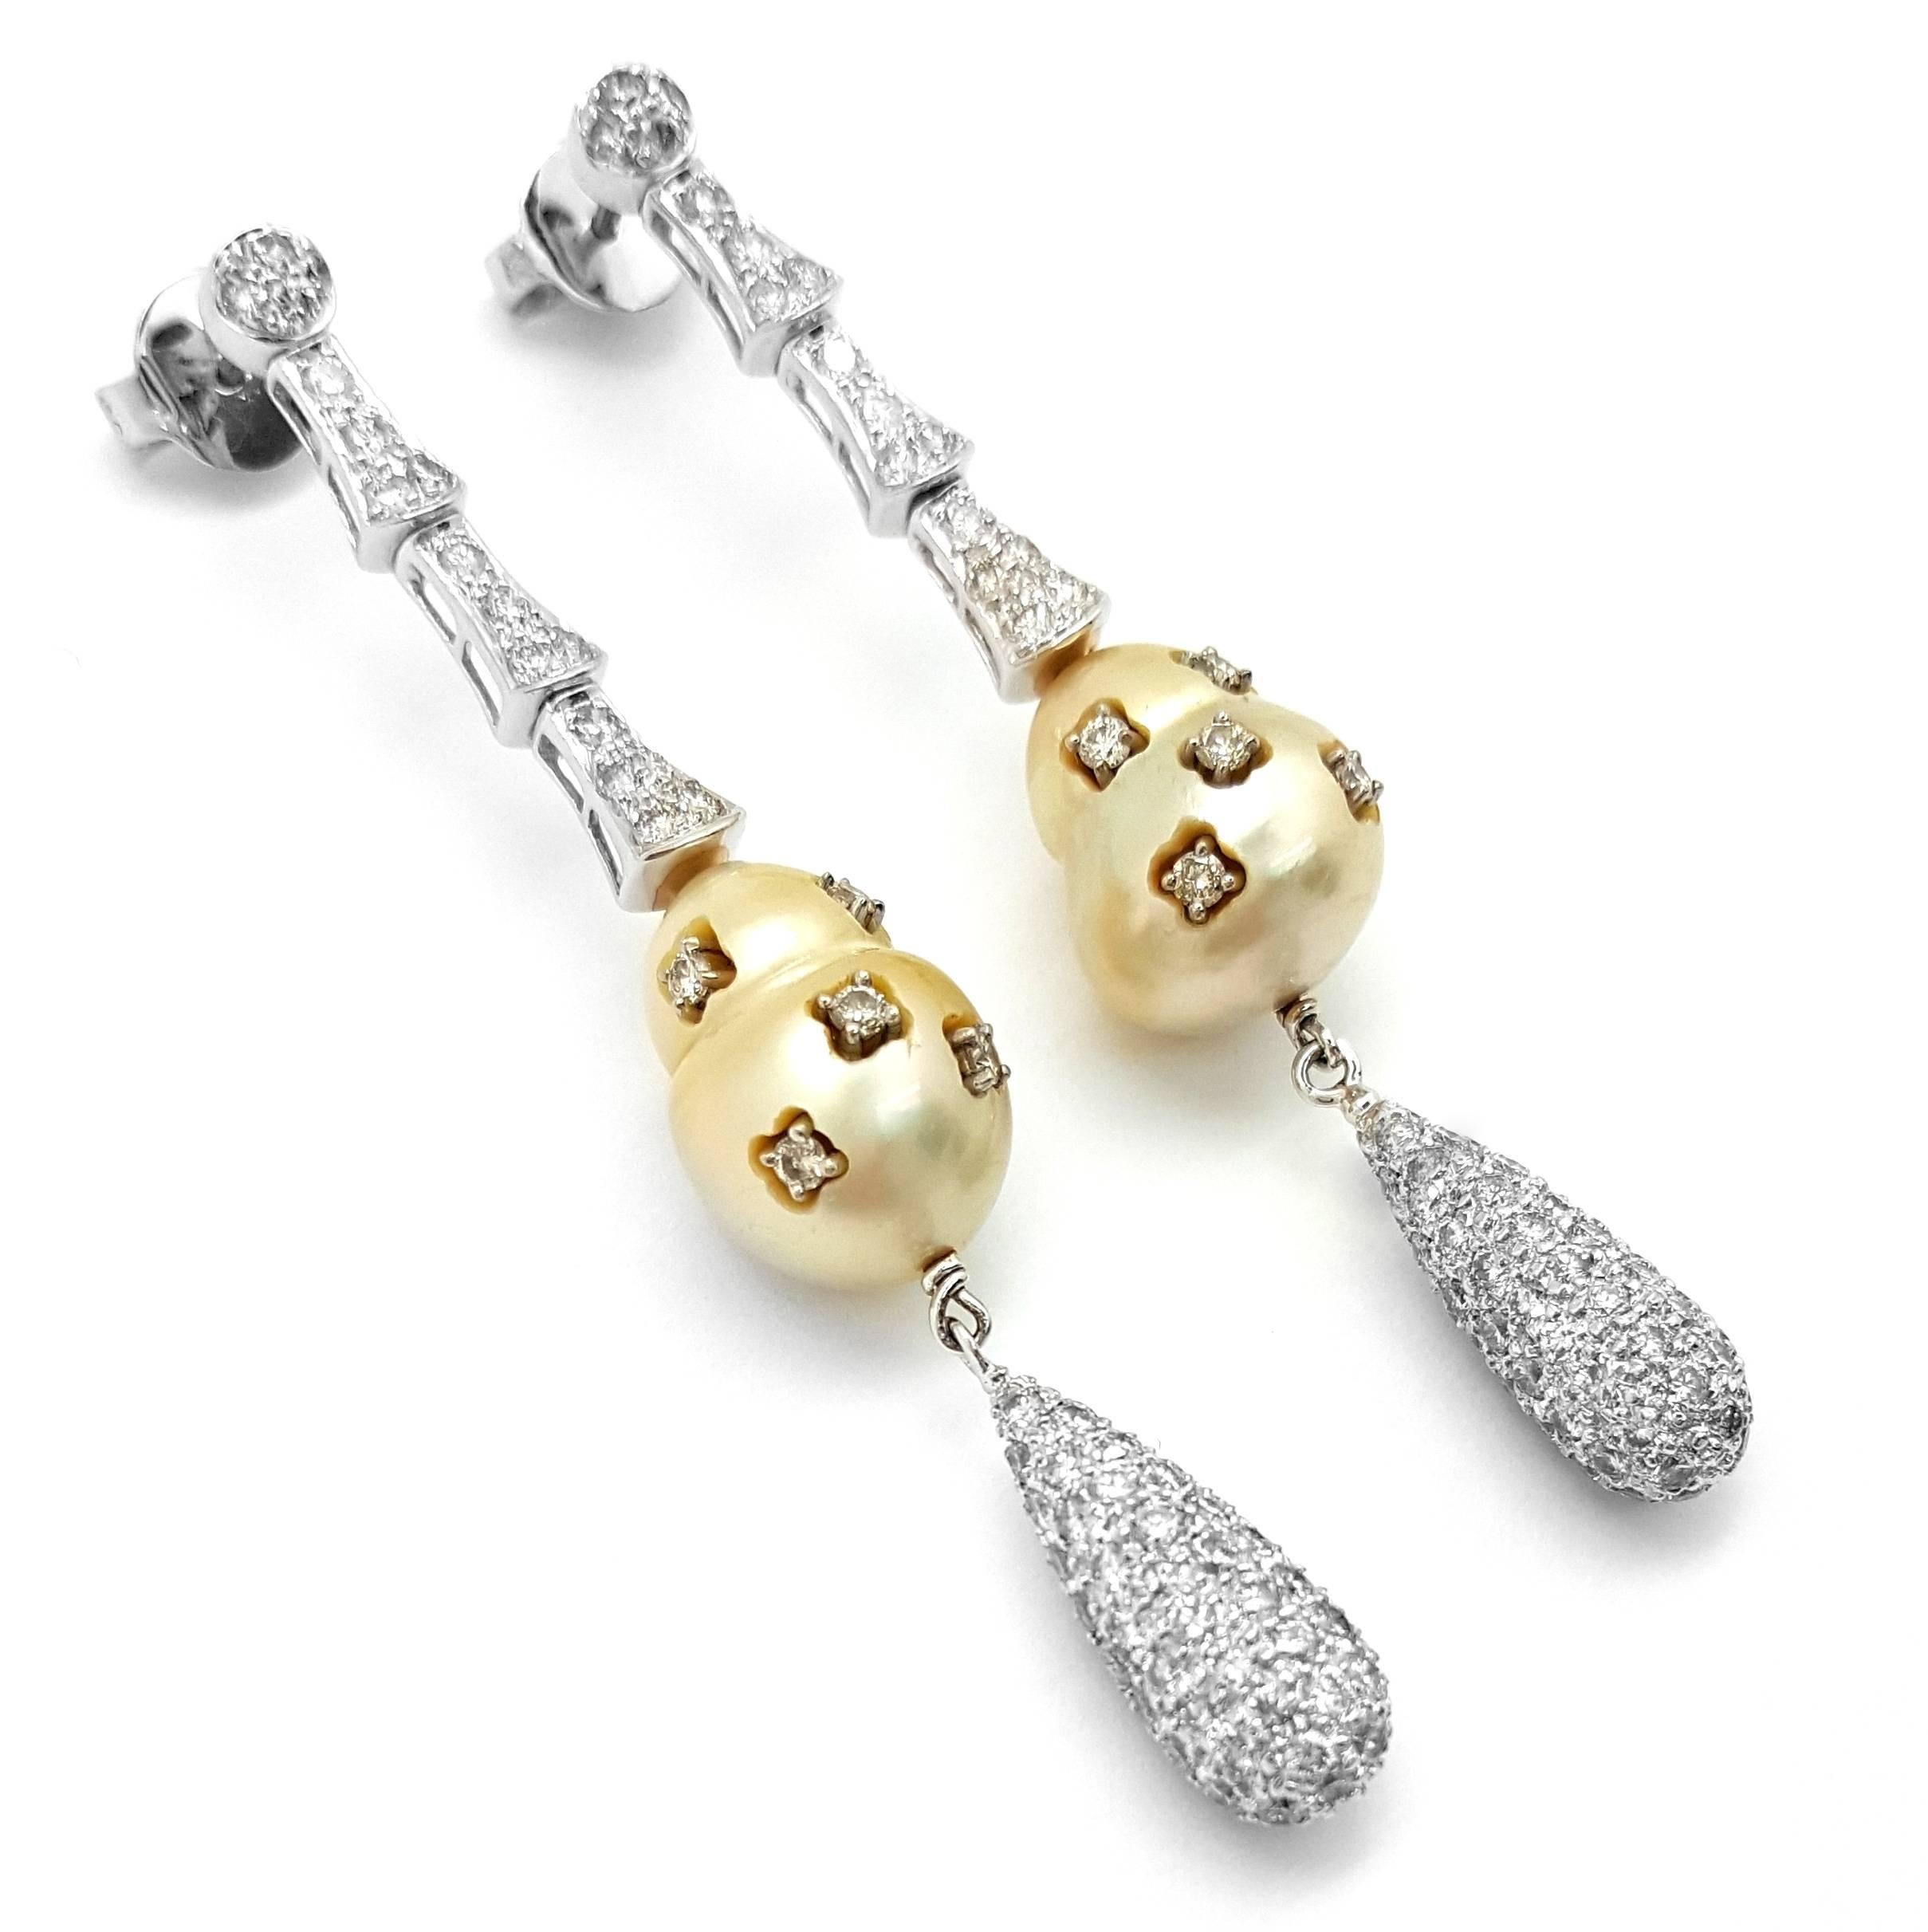 Designer: custom designed
Material: 18k white gold
Diamonds: round brilliant diamonds = 3.68 carat total weight
Pearls: baroque oval shaped south sea pearls measuring 14.40mm long x 12.28mm wide
Dimensions: 2 1/3 inches long x ½ inches